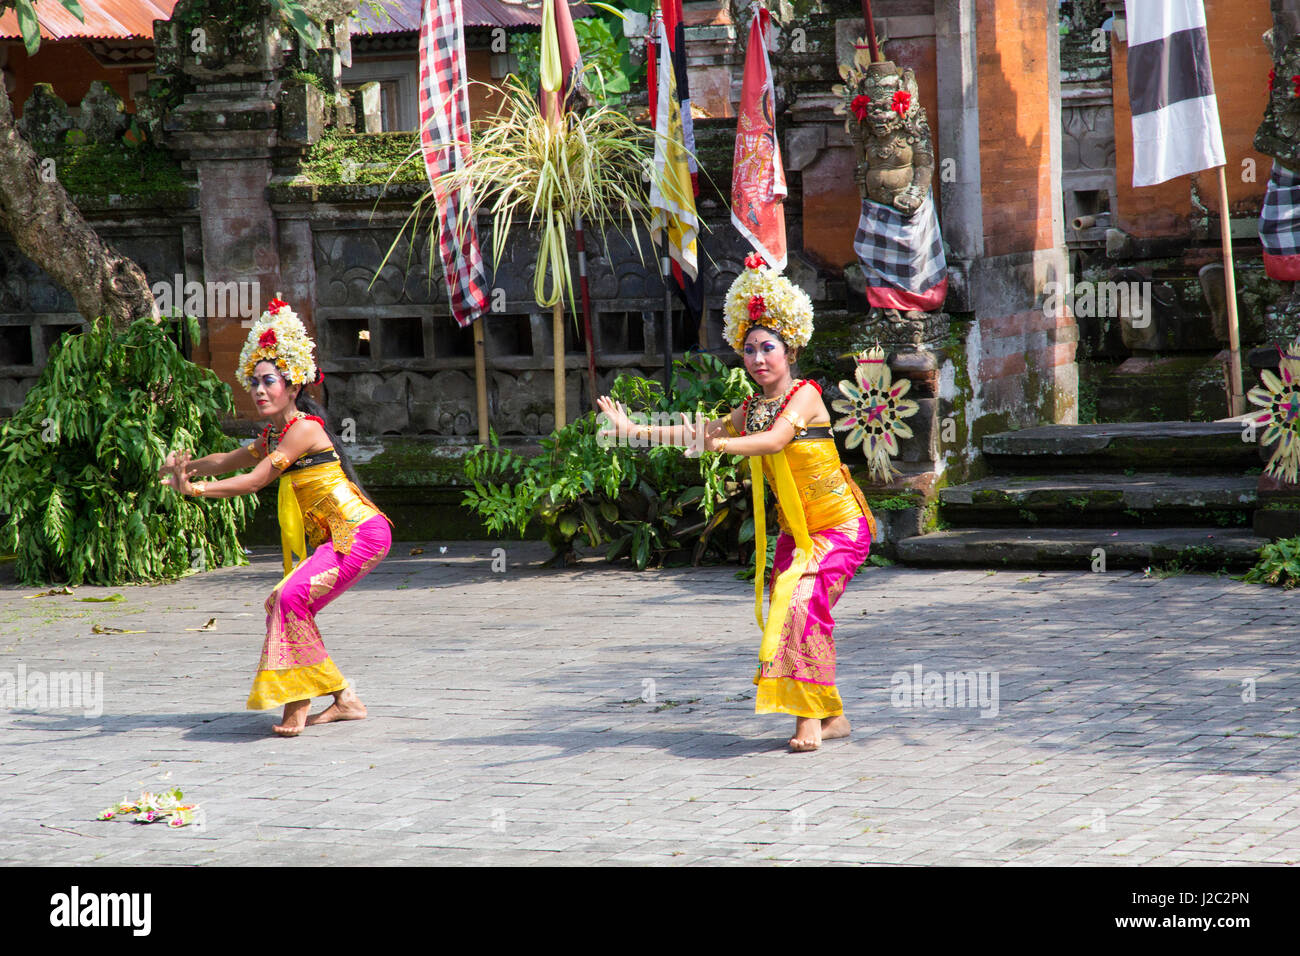 Indonesia, Bali. Girls Dressed in Traditional Dancing Costume, Legong Dancers with Frangipani floral headdress. (Editorial Use Only) Stock Photo